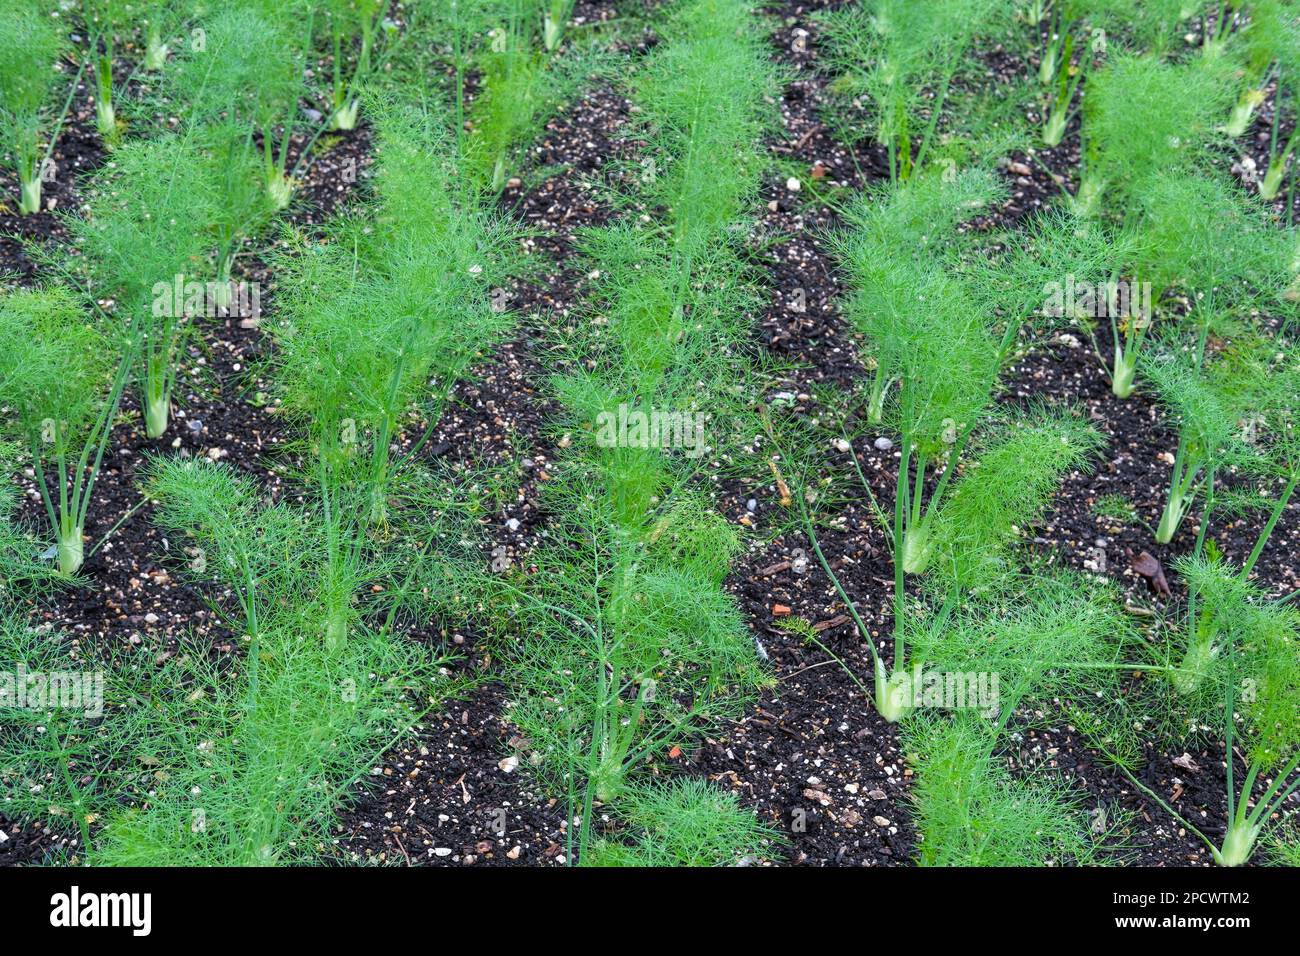 Florence Fennel F1 Rondo, VFE12, Foeniculum vulgare, Hybrid Florence fennel, young plants growing in a vegetable plot Stock Photo